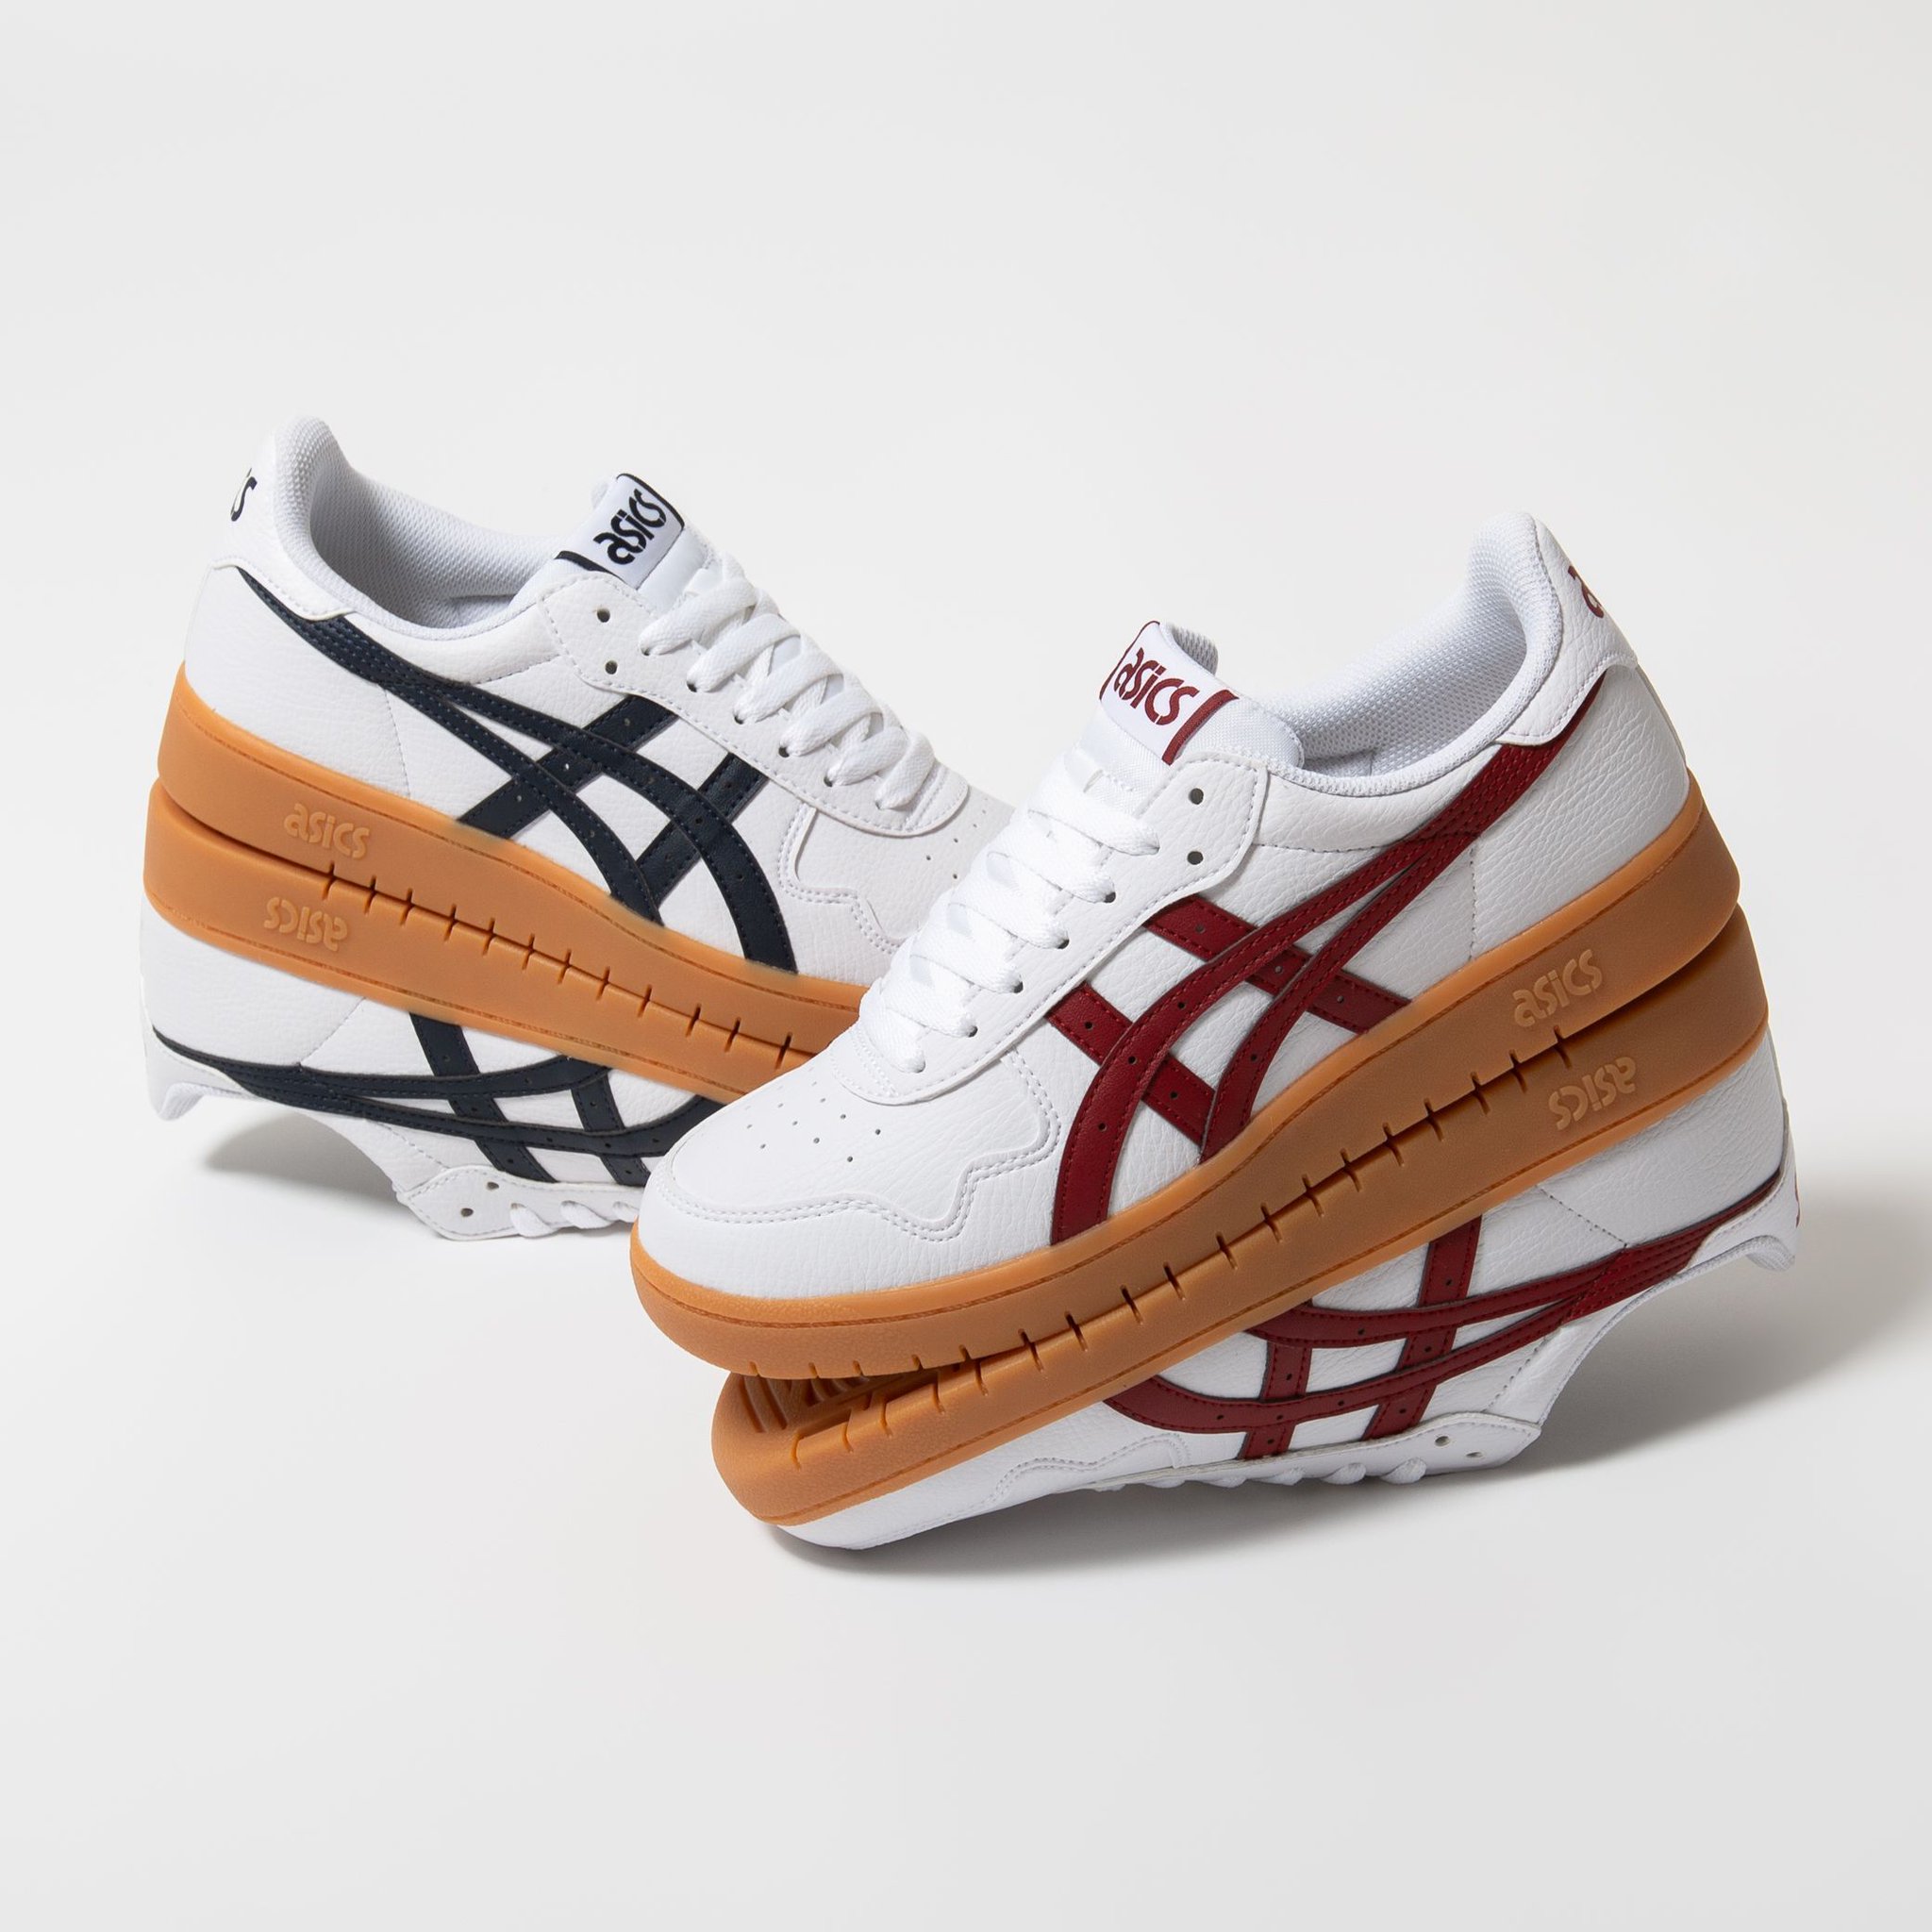 død enhed Overskæg Titolo on Twitter: "Asics Japan 🇯🇵 Now available online. get your pair ➡️  https://t.co/bcUzvfYsbe US 7 (40) - US 11 (45) style code 🔎 1191A163-105  and 1191A163-106 #titoloSHOP #titolo #asics #asicsJAPAN #japan